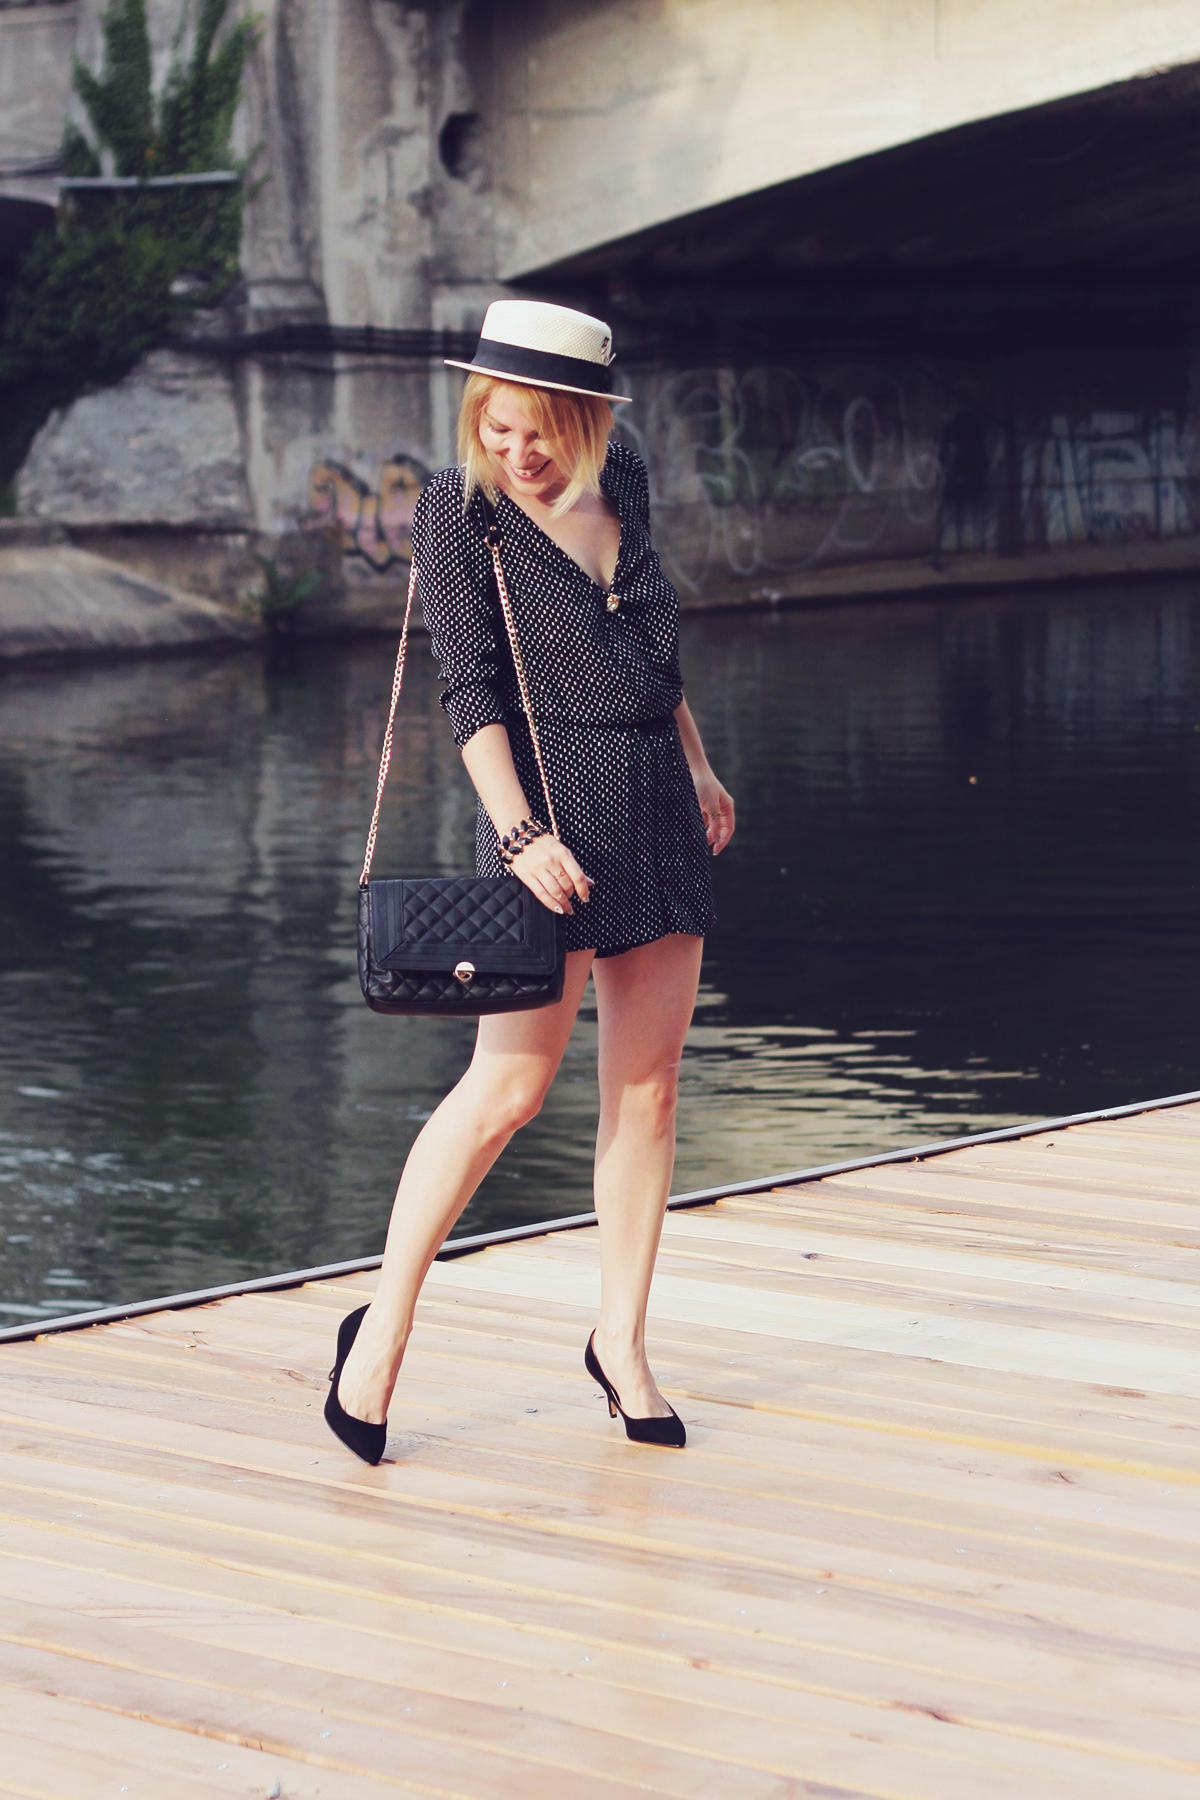 straw boater hat and romper